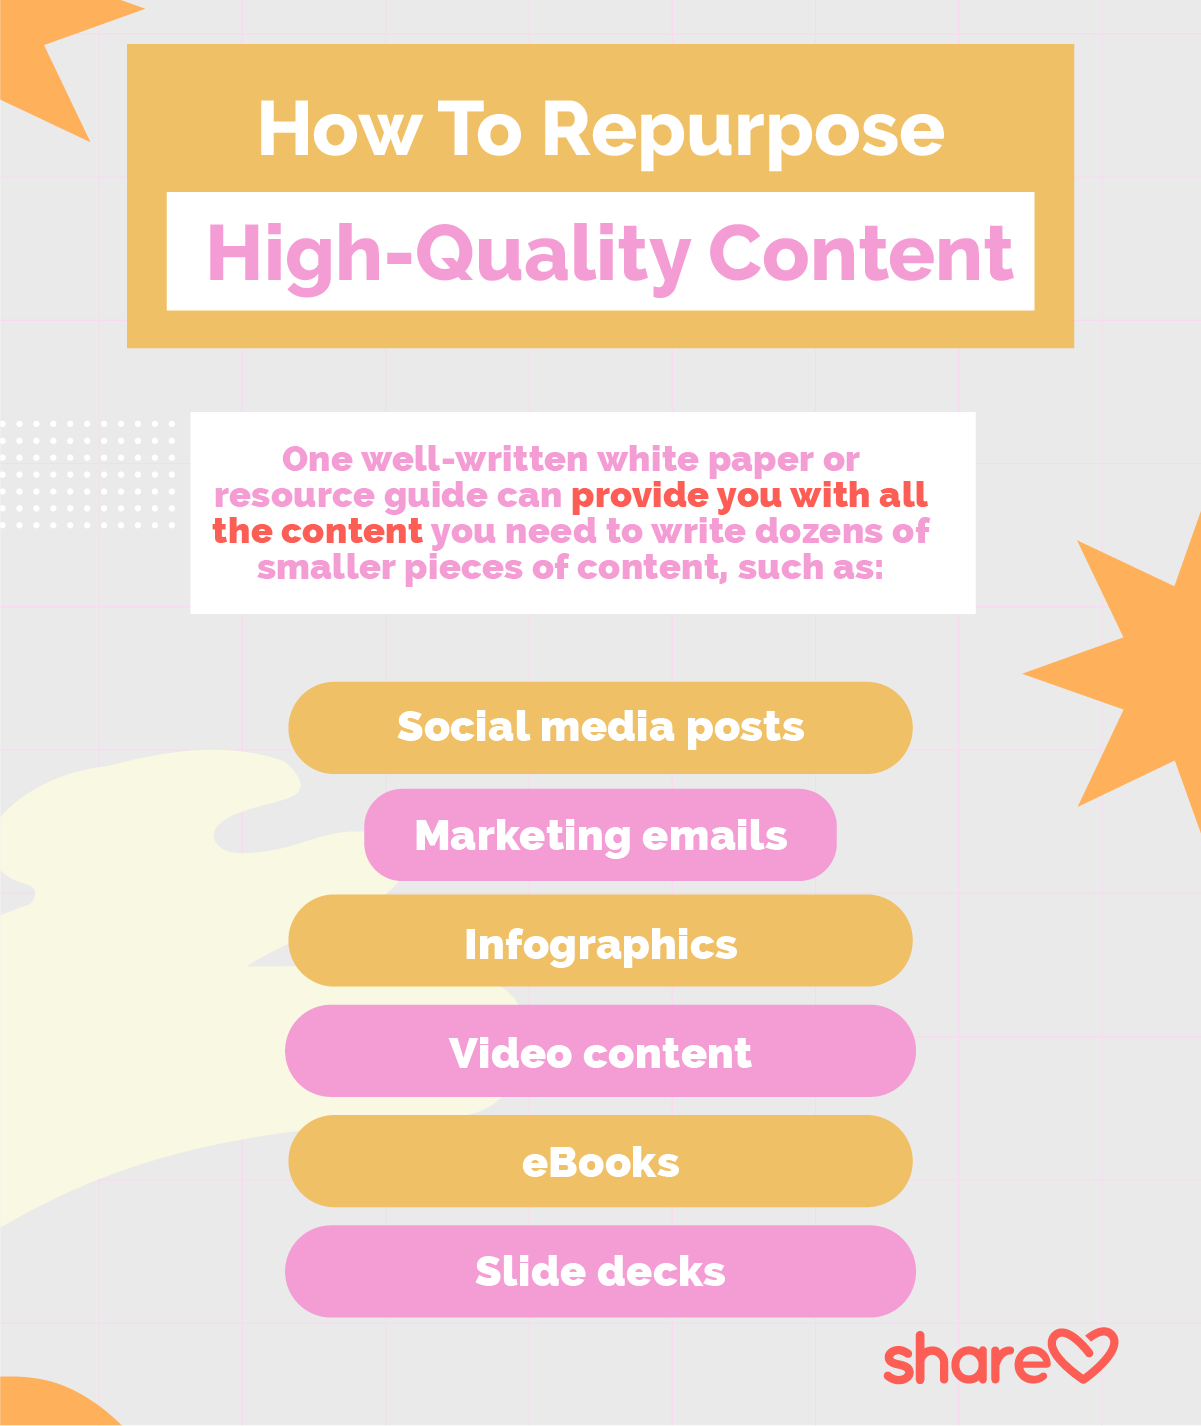 How To Repurpose High-Quality Content 